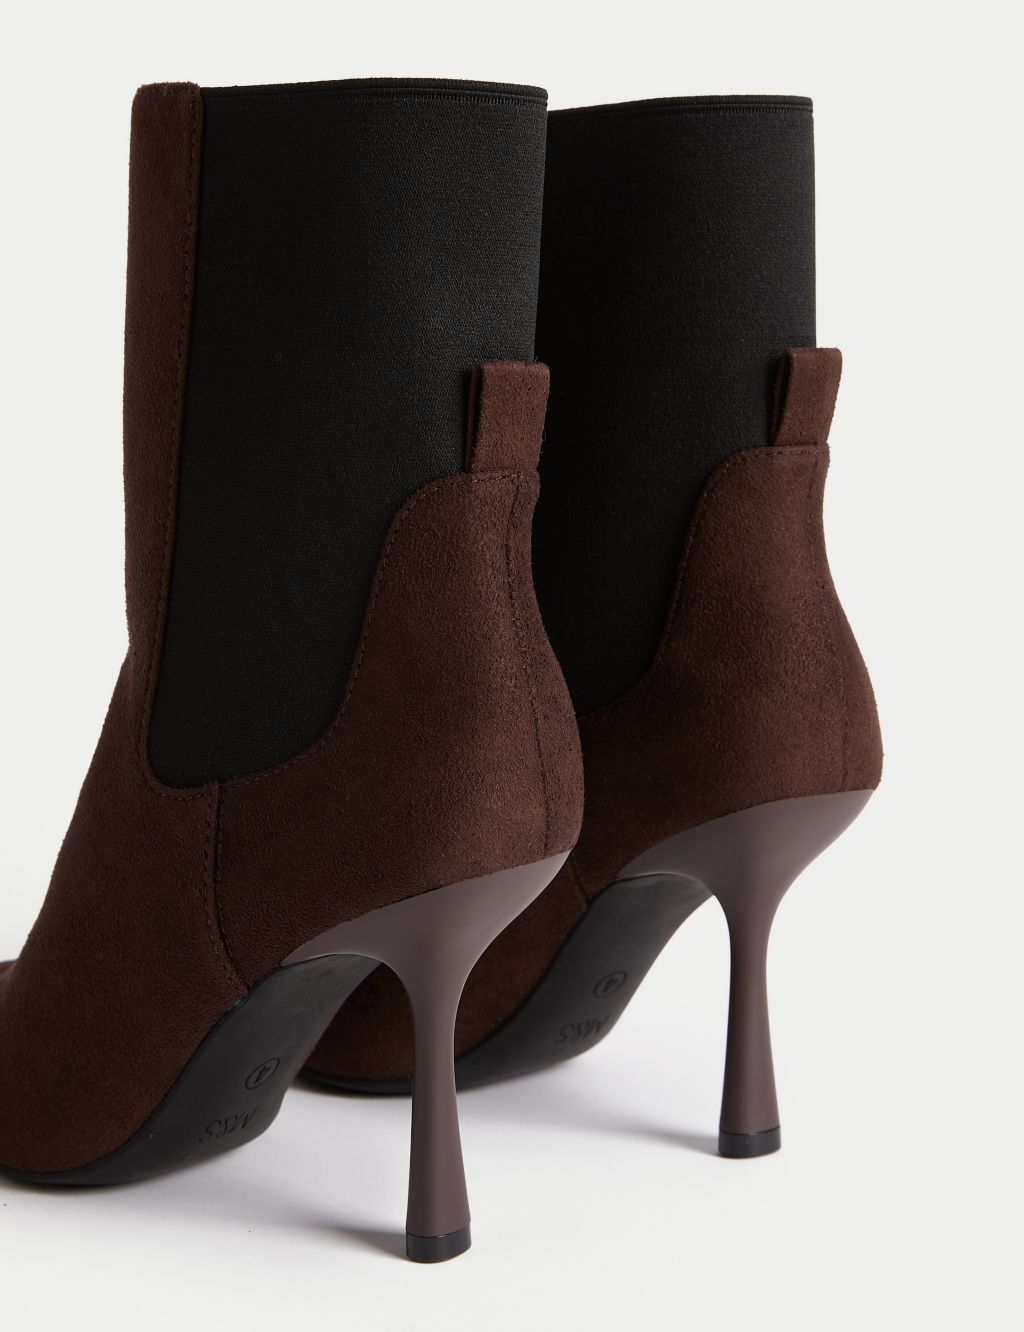 Stiletto Heel Pointed Ankle Boots image 3